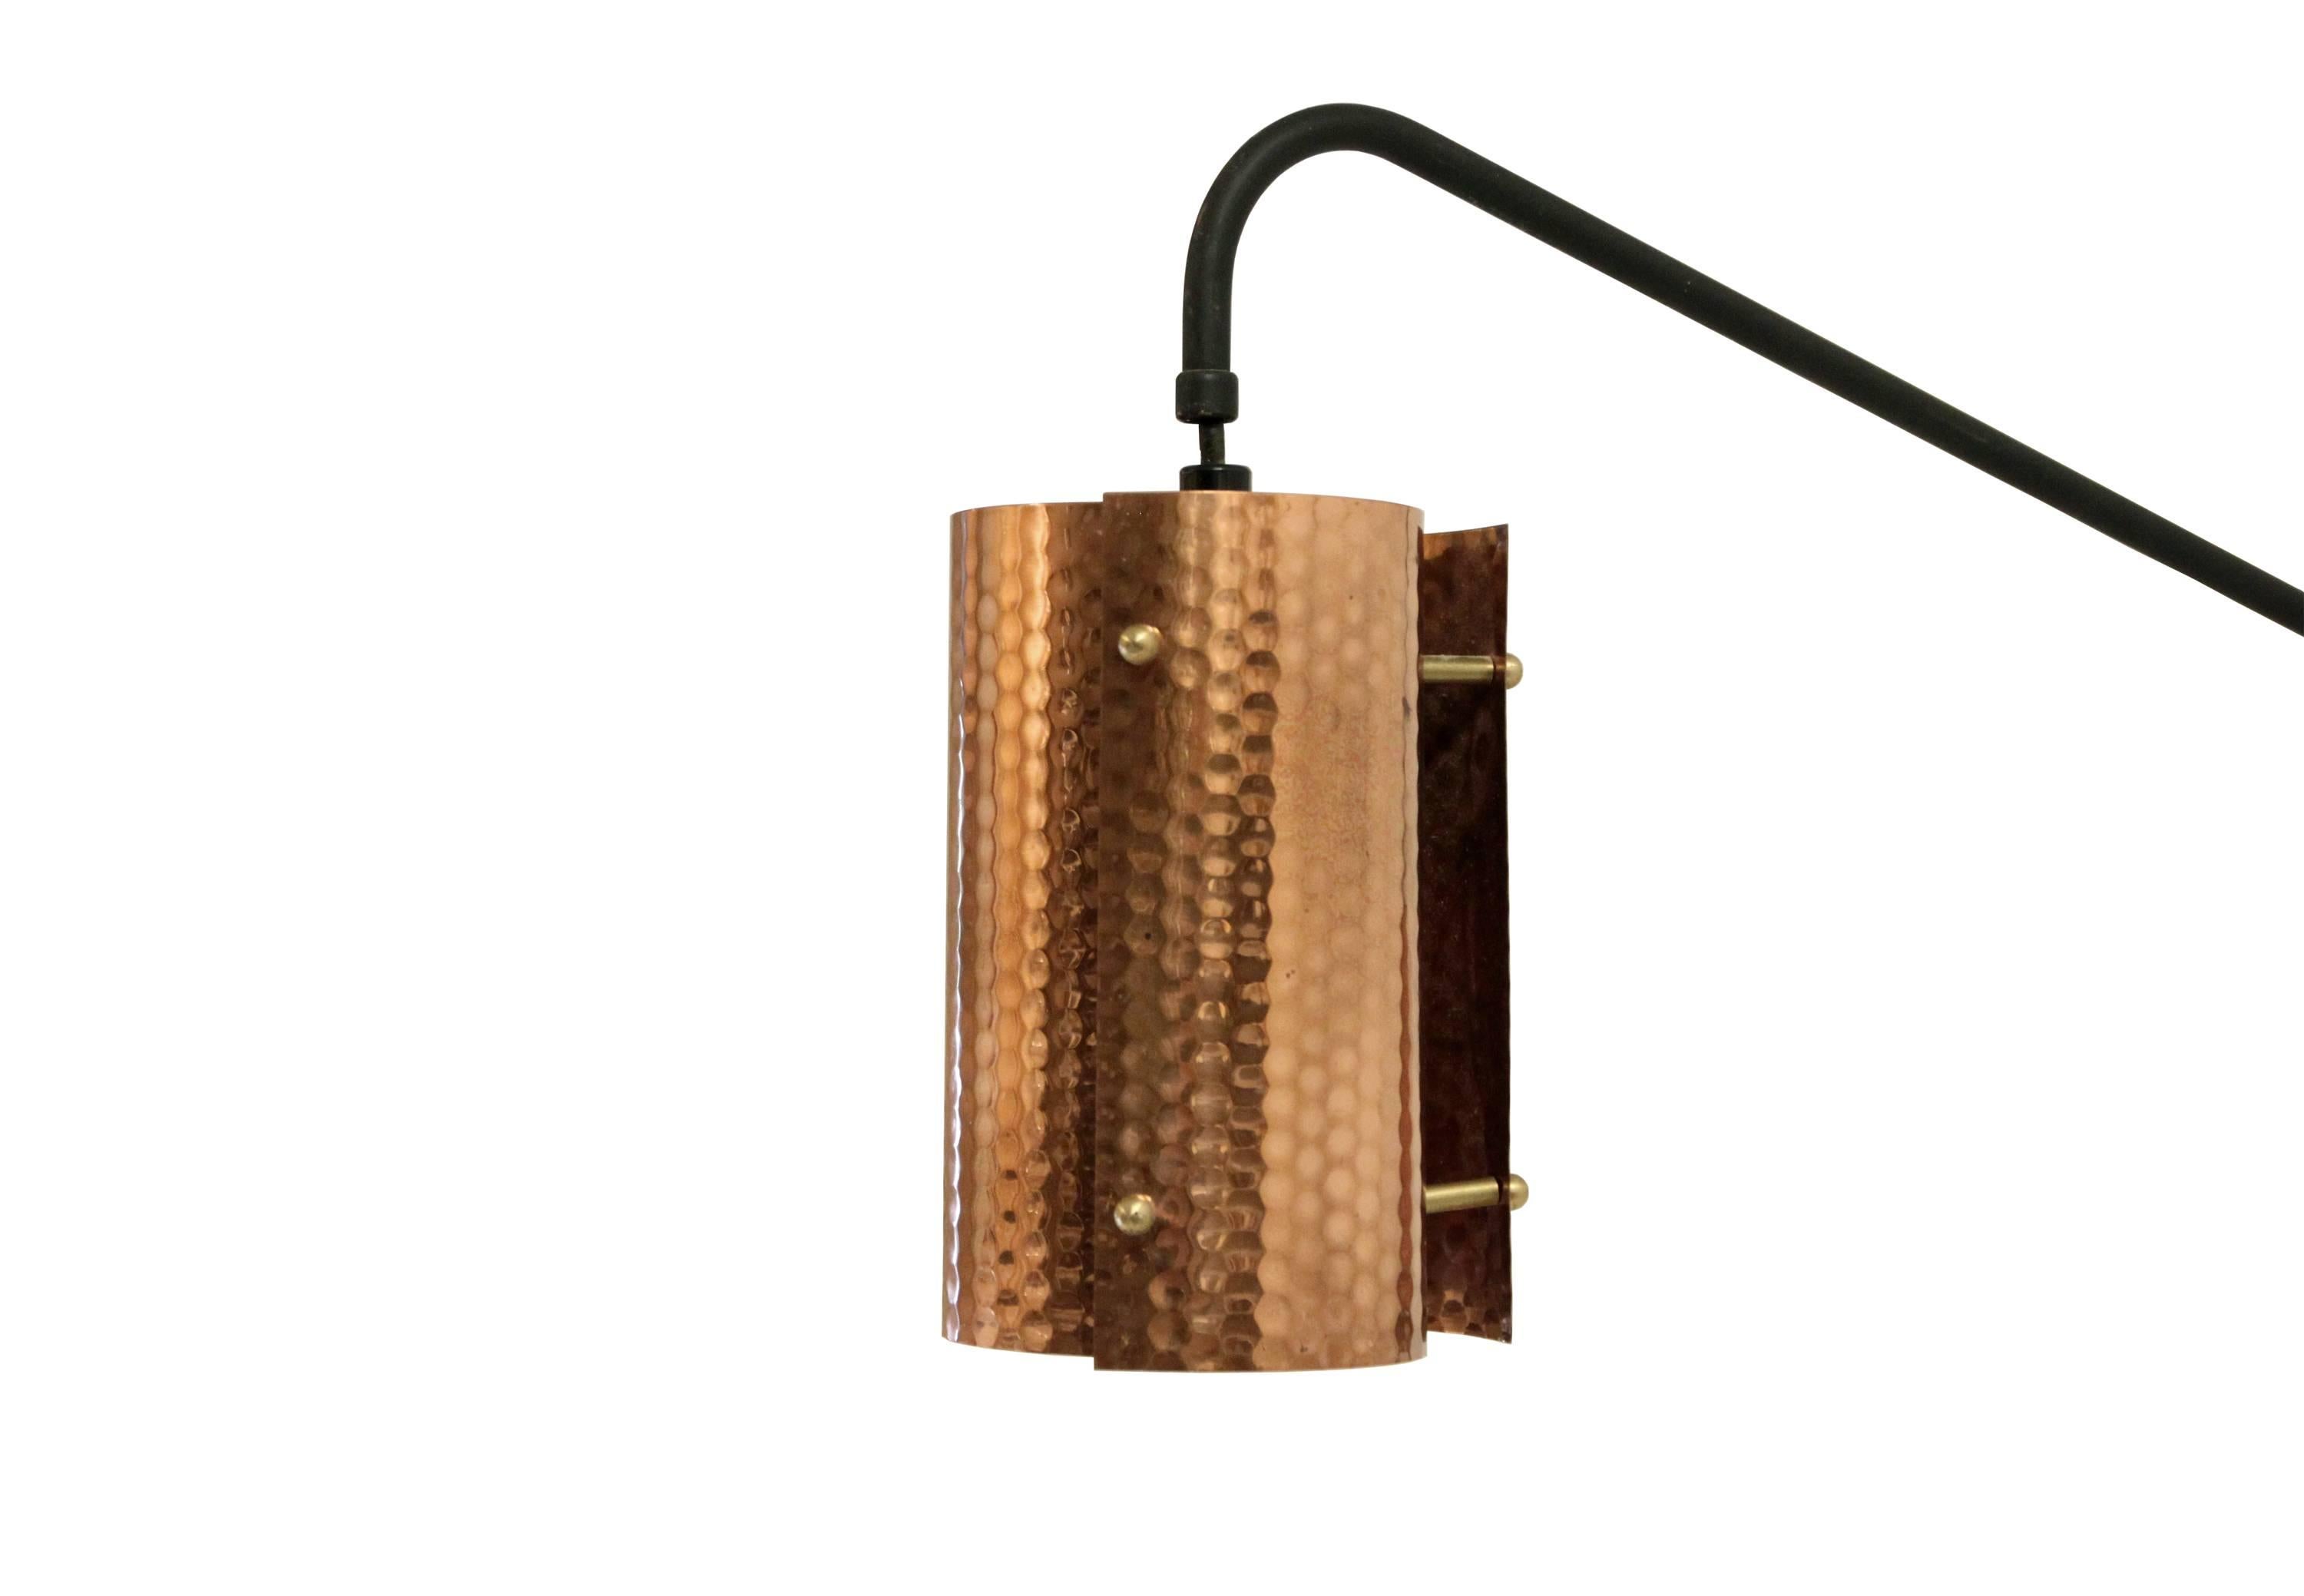 Decorative wall light in copper and lacquered steel.

Designed and made in Norway in the second half of the 1960s.

The lamp is fully working and in good vintage condition.